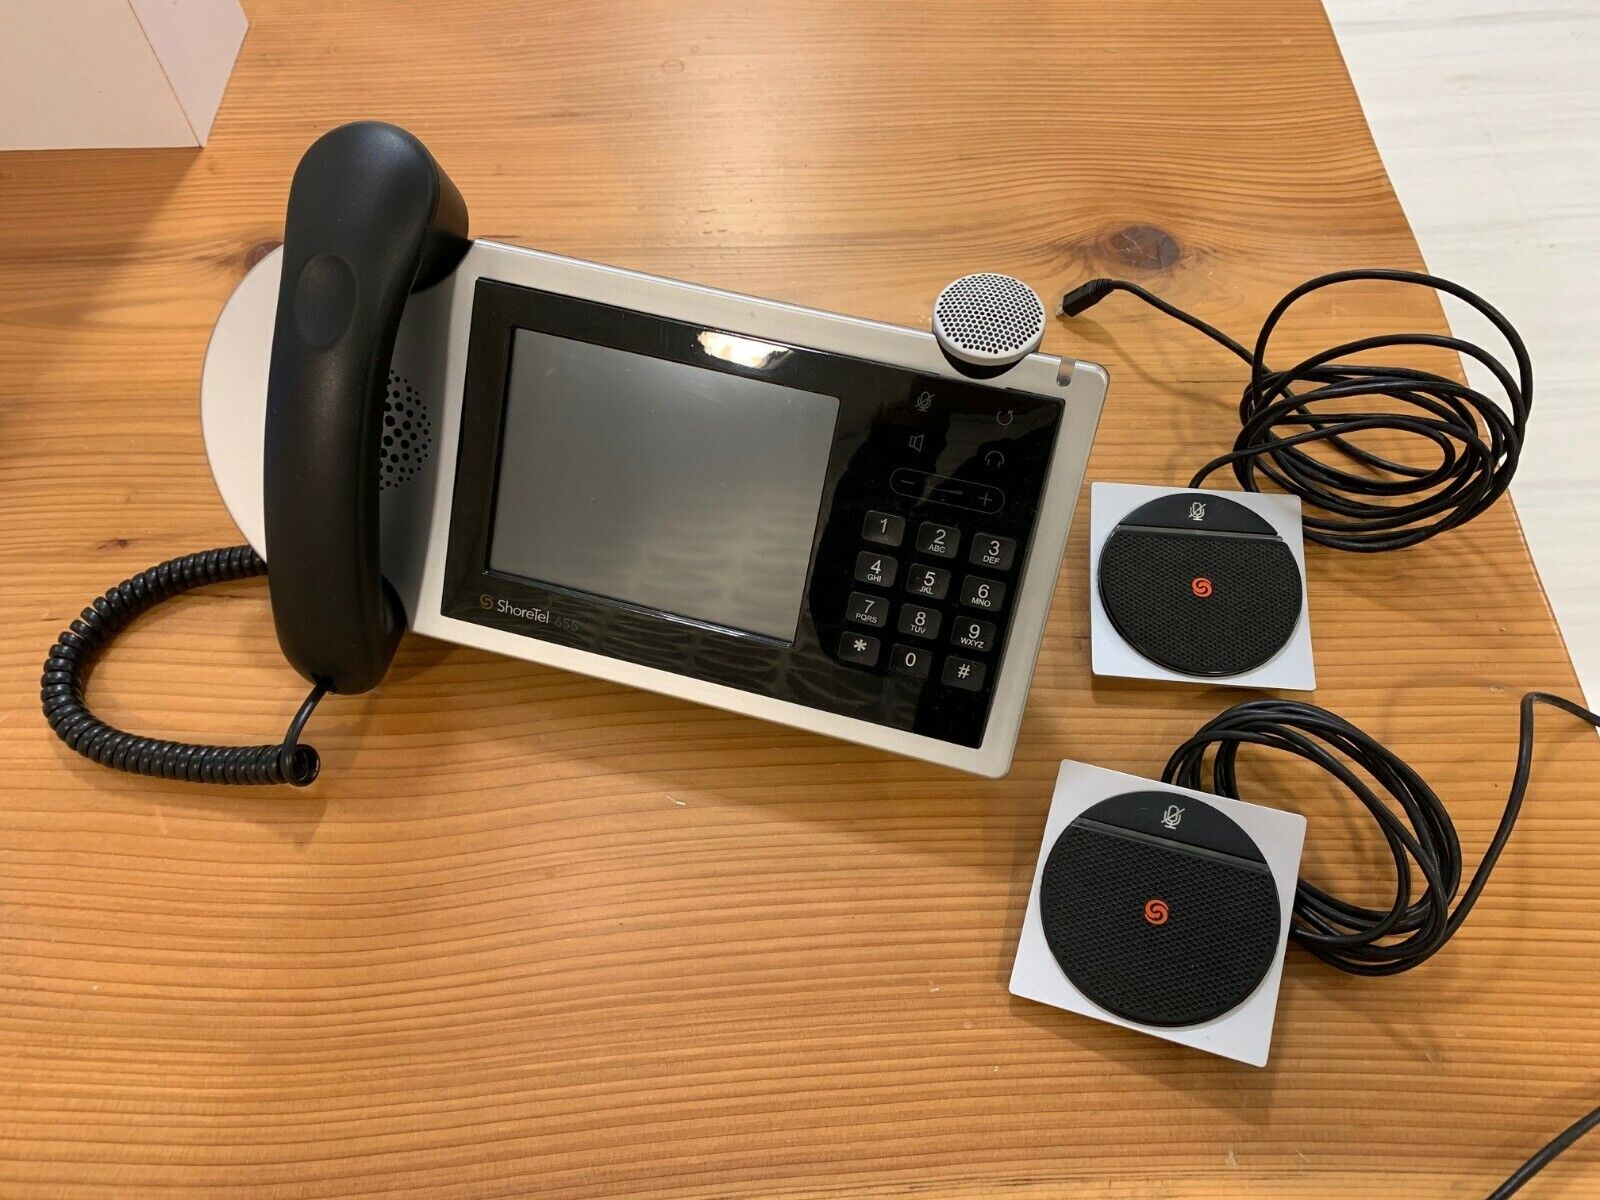 Shoretel Phone System STID-T1 with Server, Switch, and 54 Phones